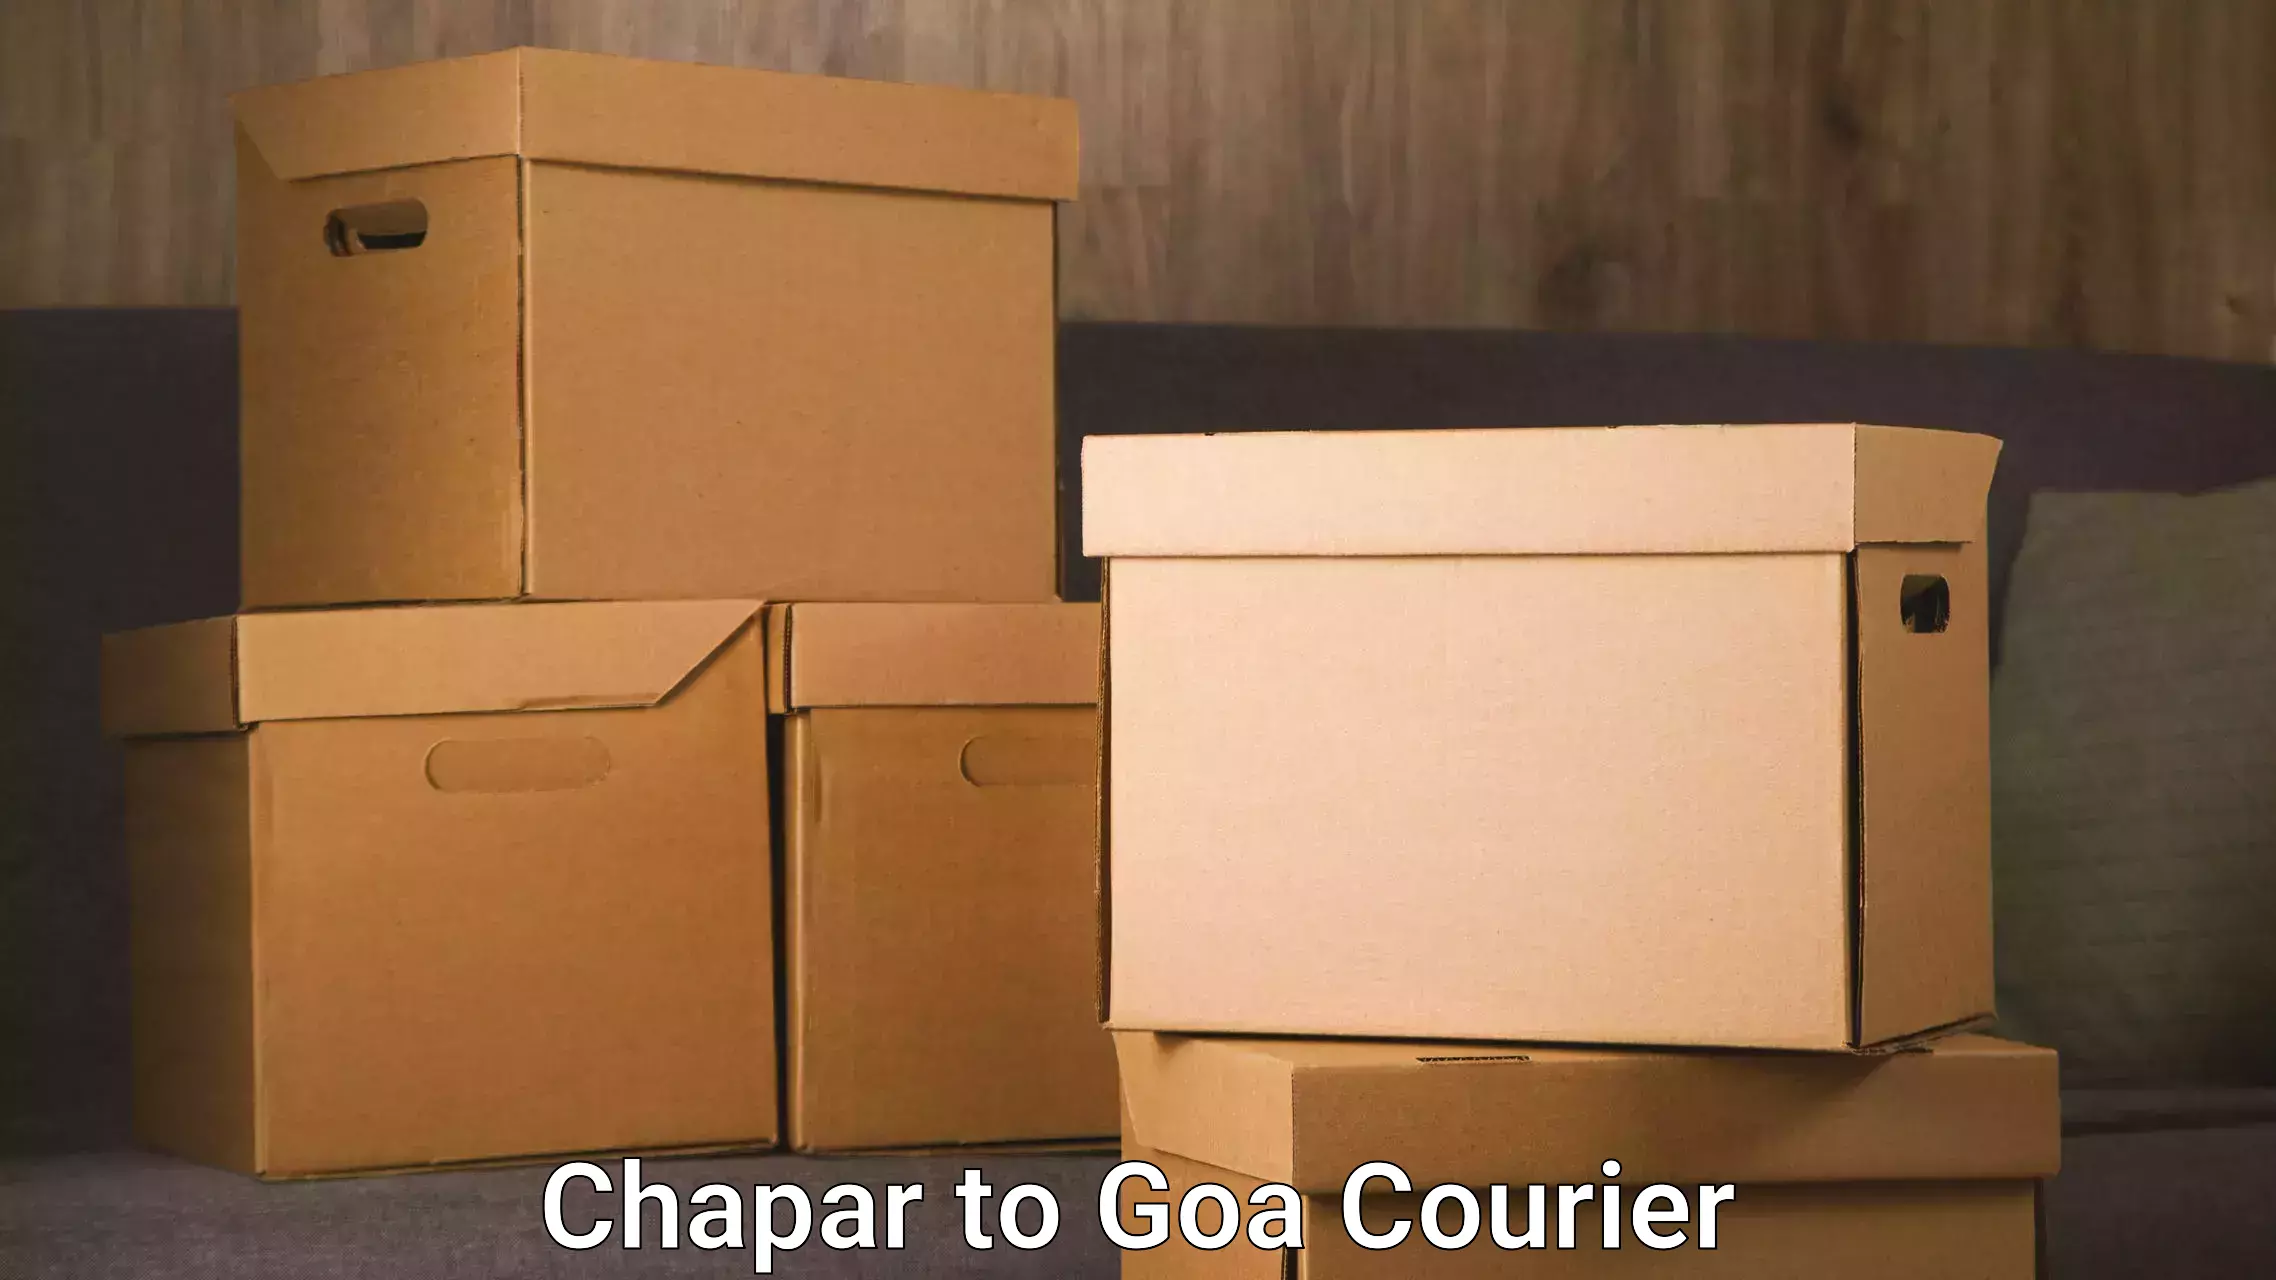 Reliable courier service in Chapar to Bardez